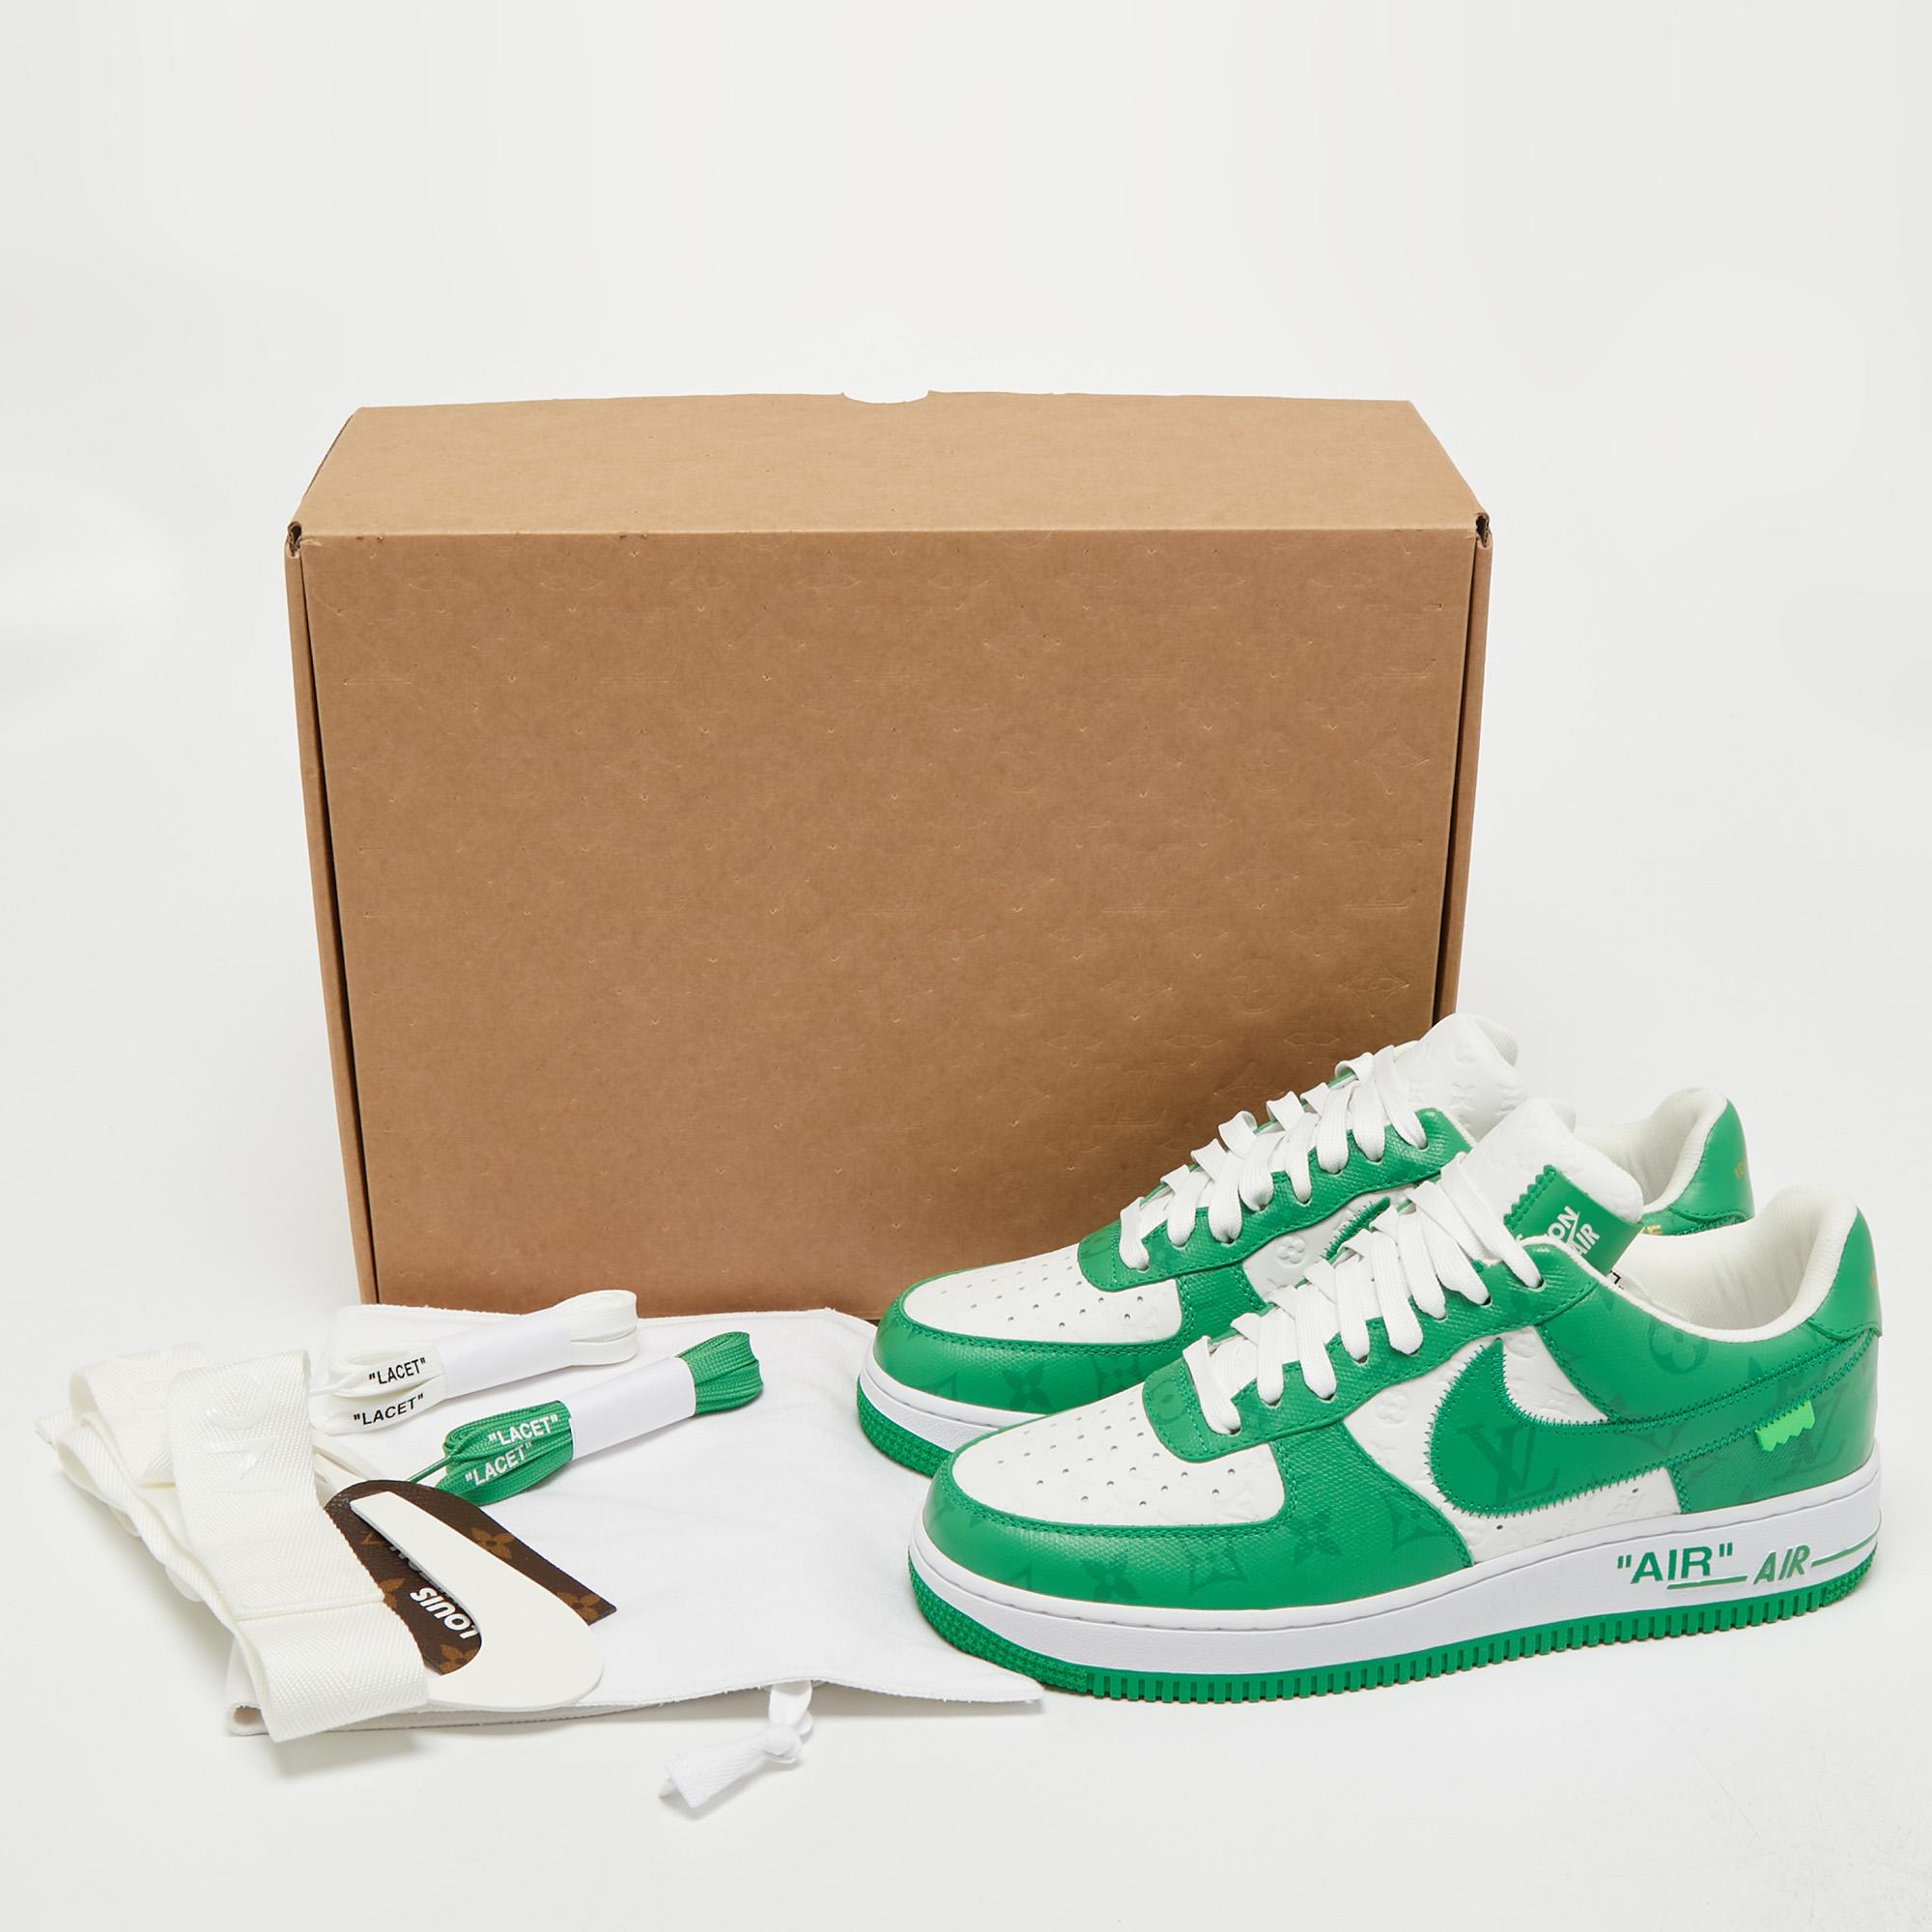 Louis Vuitton x Nike Air Force 1 Low Green Leather Sneakers Size 41 6